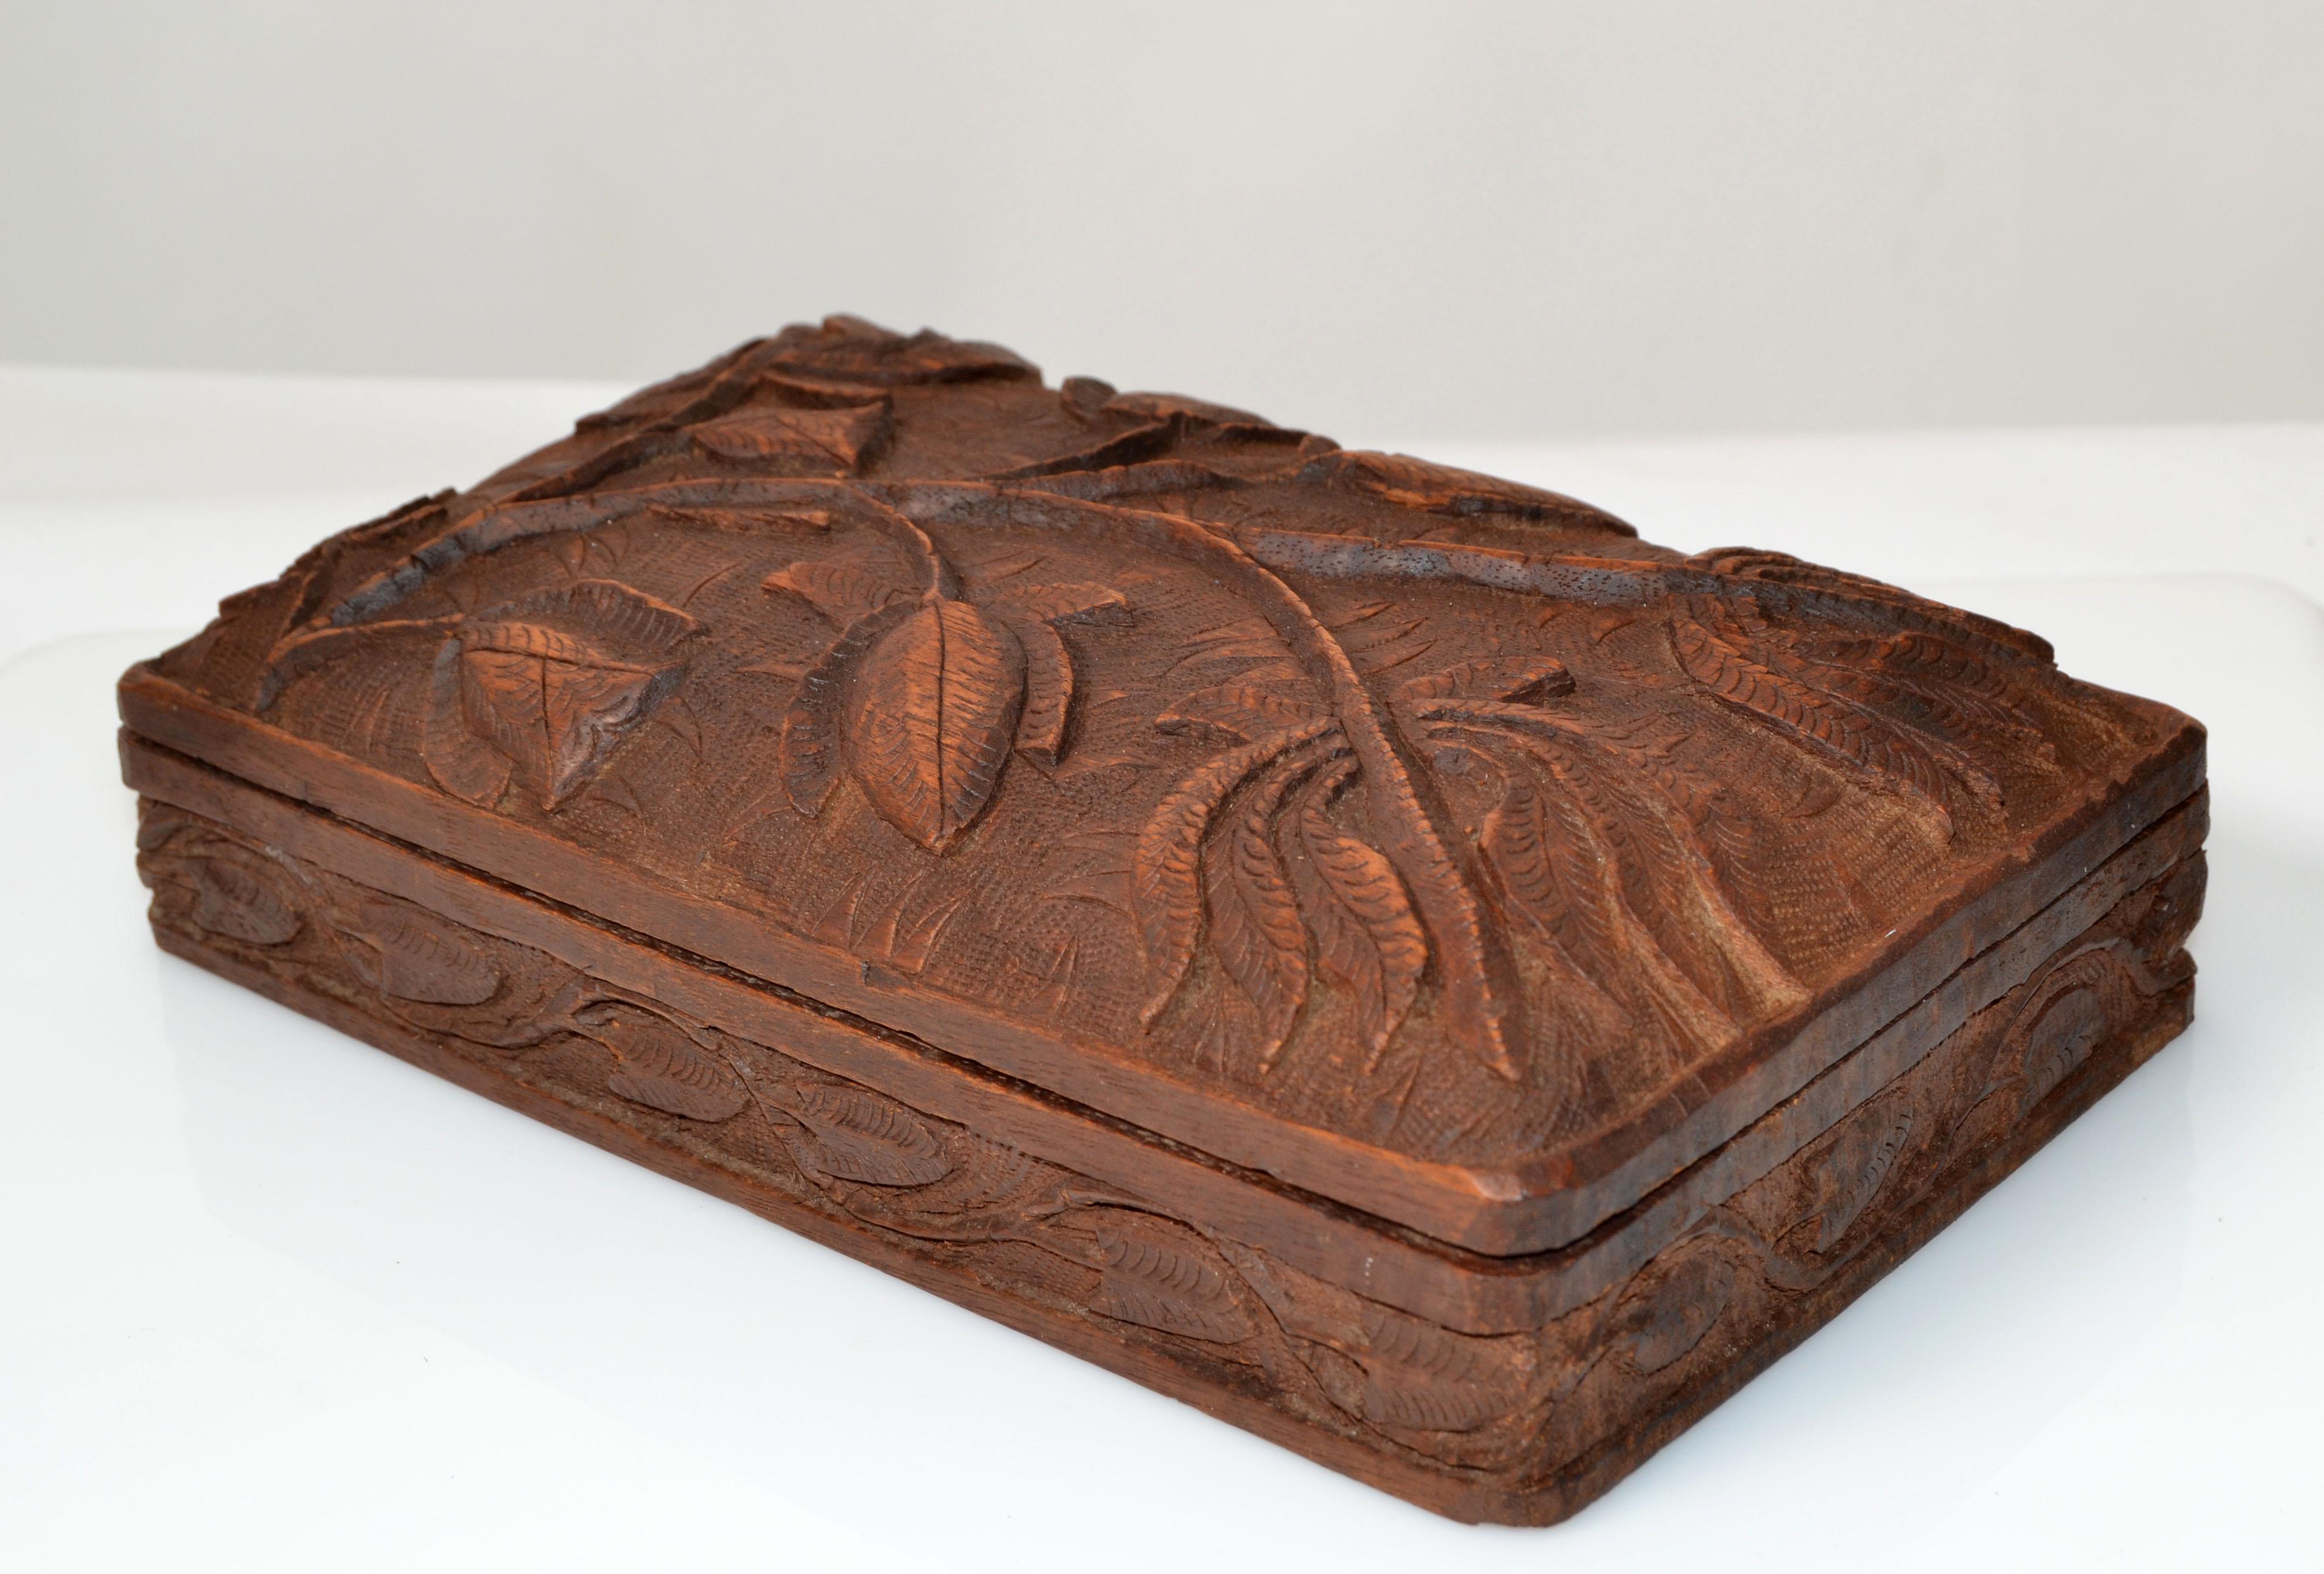 Vintage handmade beautifully carved wooden box, jewelry box or keepsake box.
The Inside has 2 compartments which measure 3.38 x 3.38 inches. 
No makers mark.
 